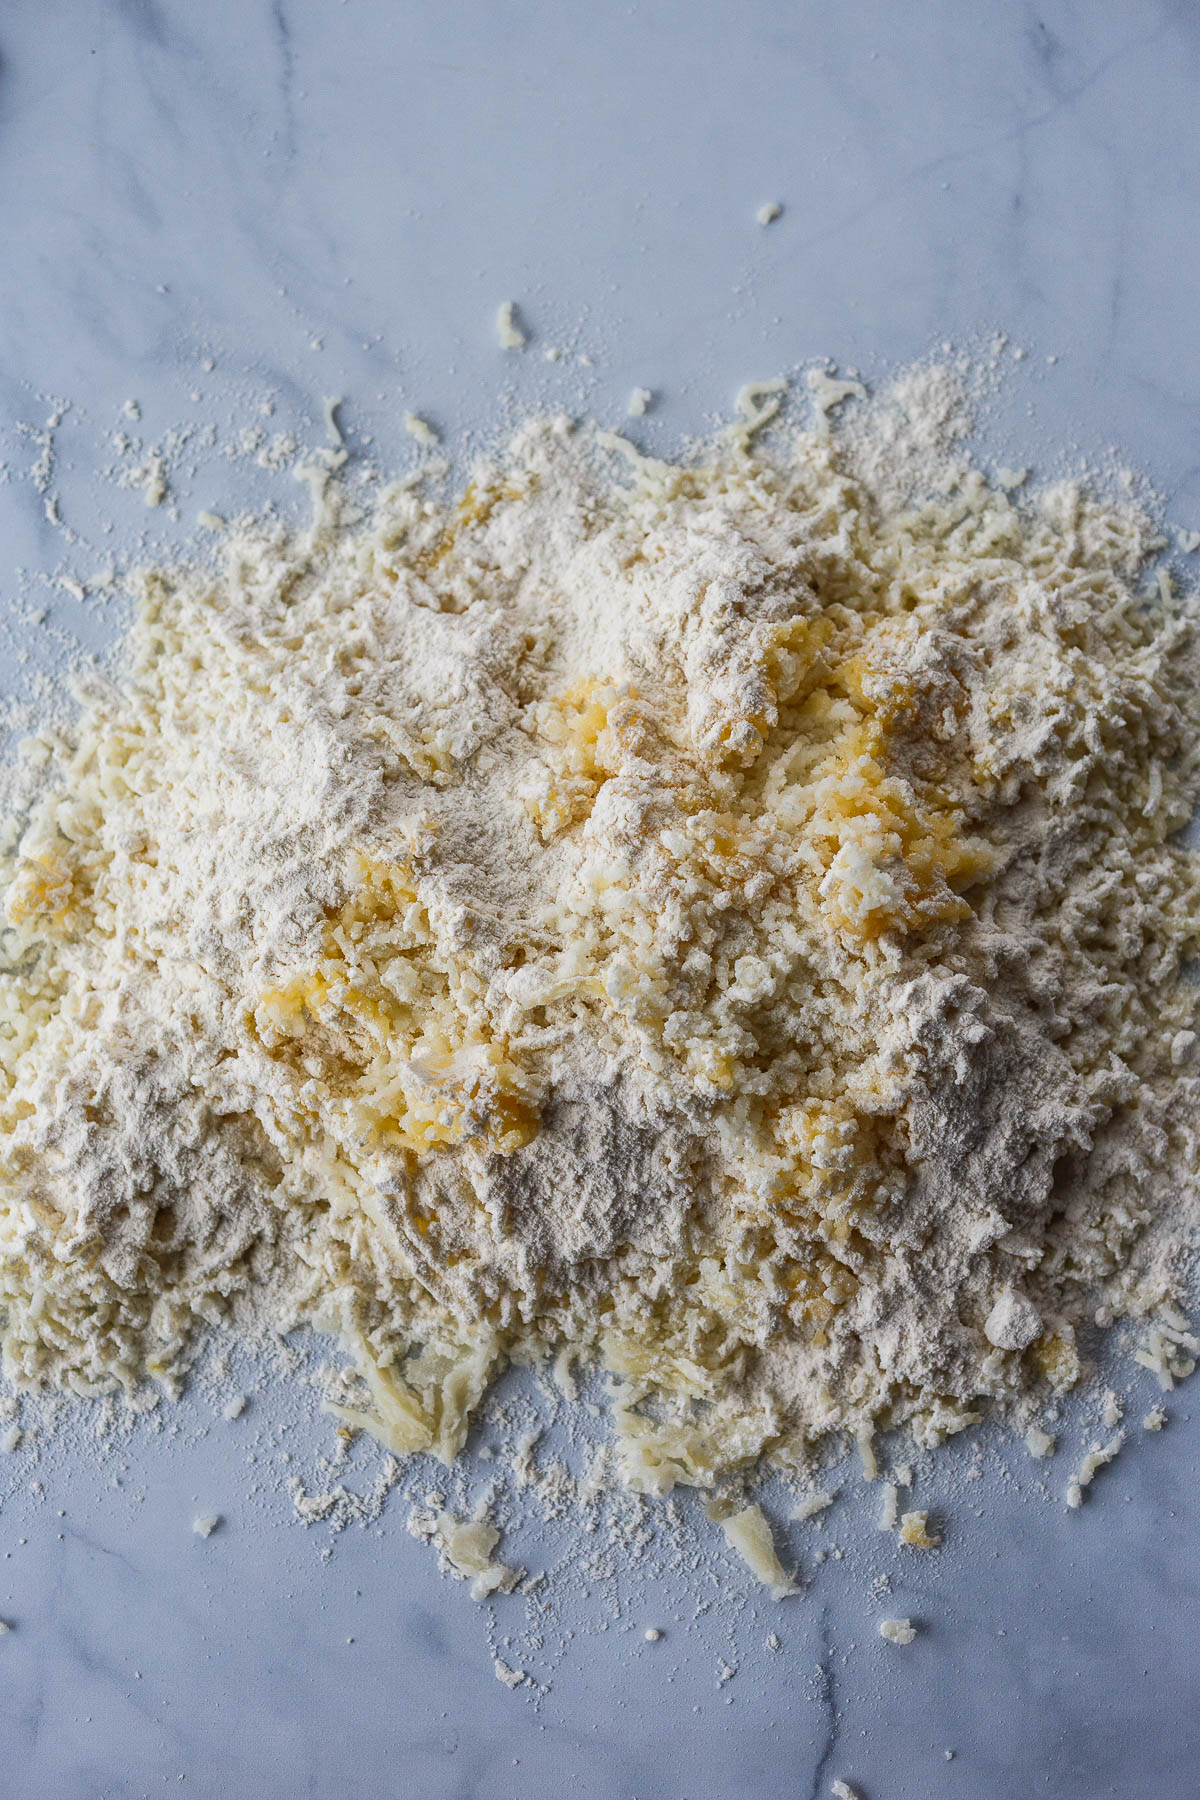 Riced potatoes mixing with egg and flour.